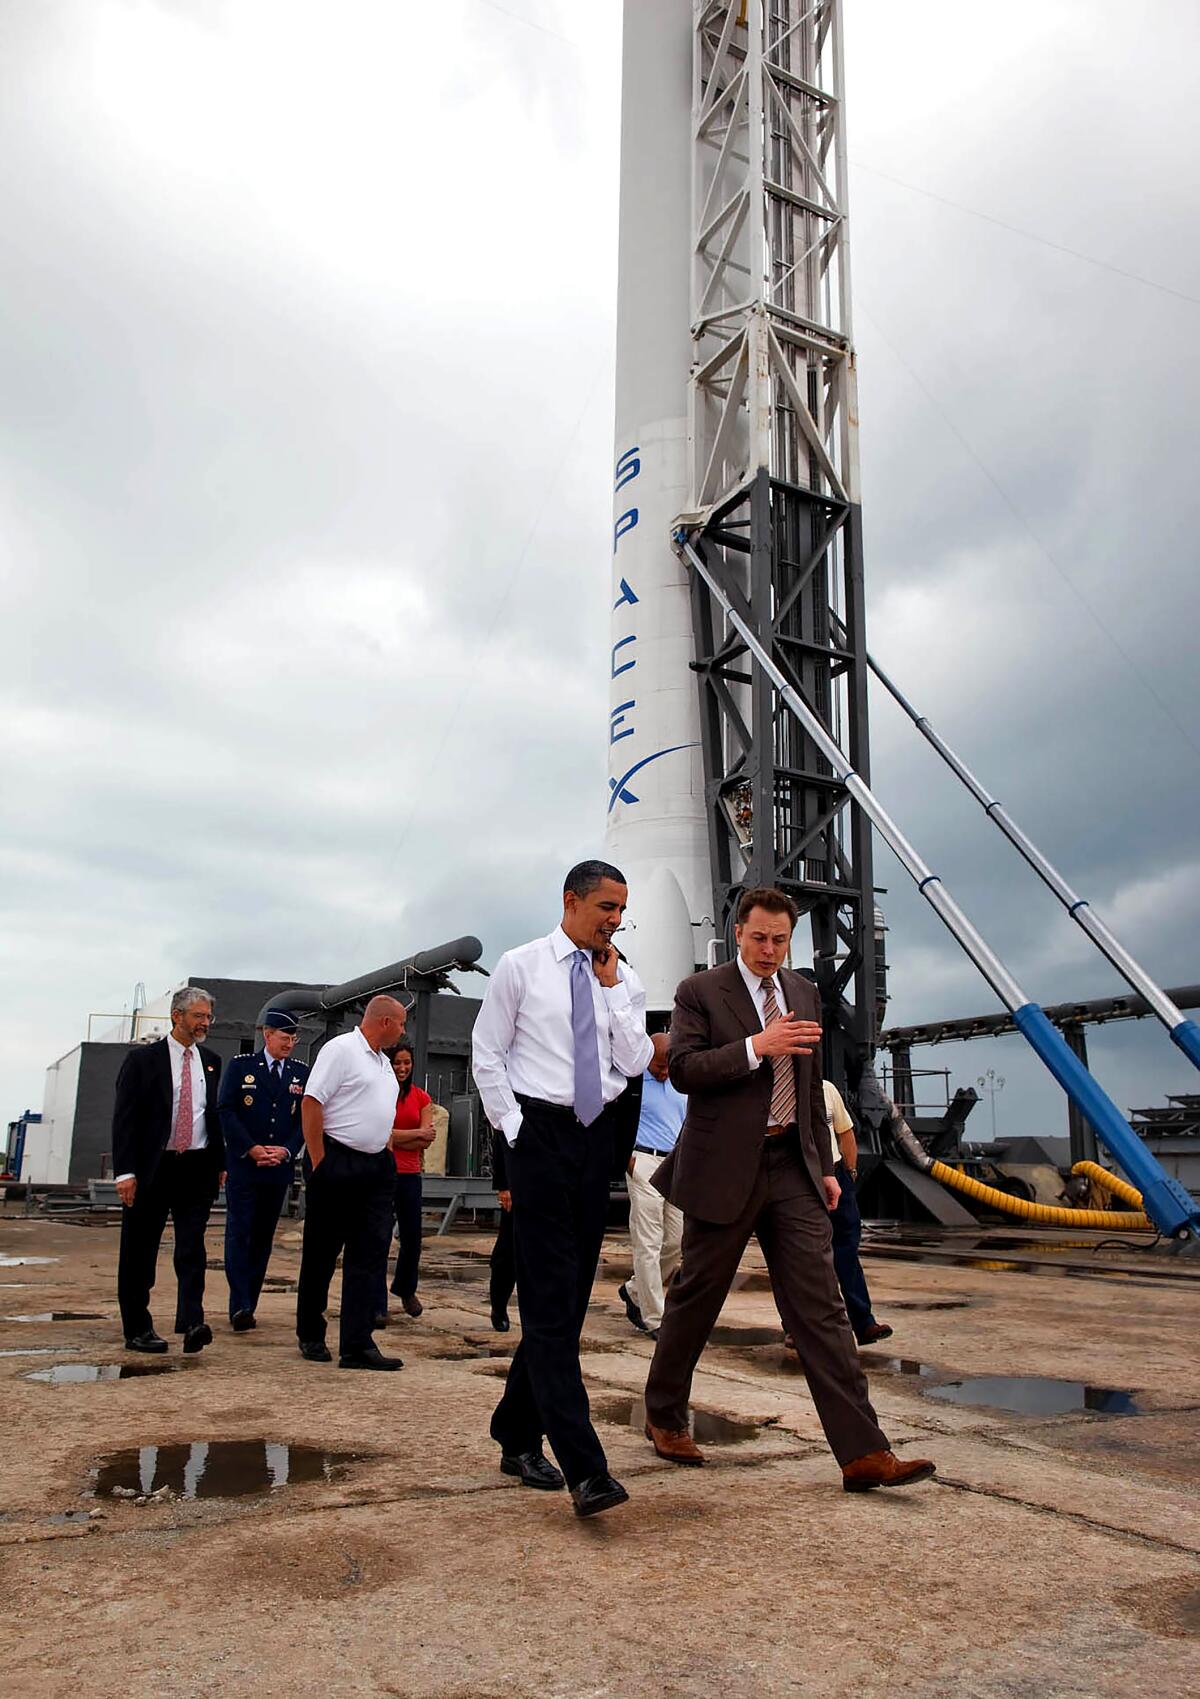 Two men walk past a rocket on the launch pad, with a group of men behind them.